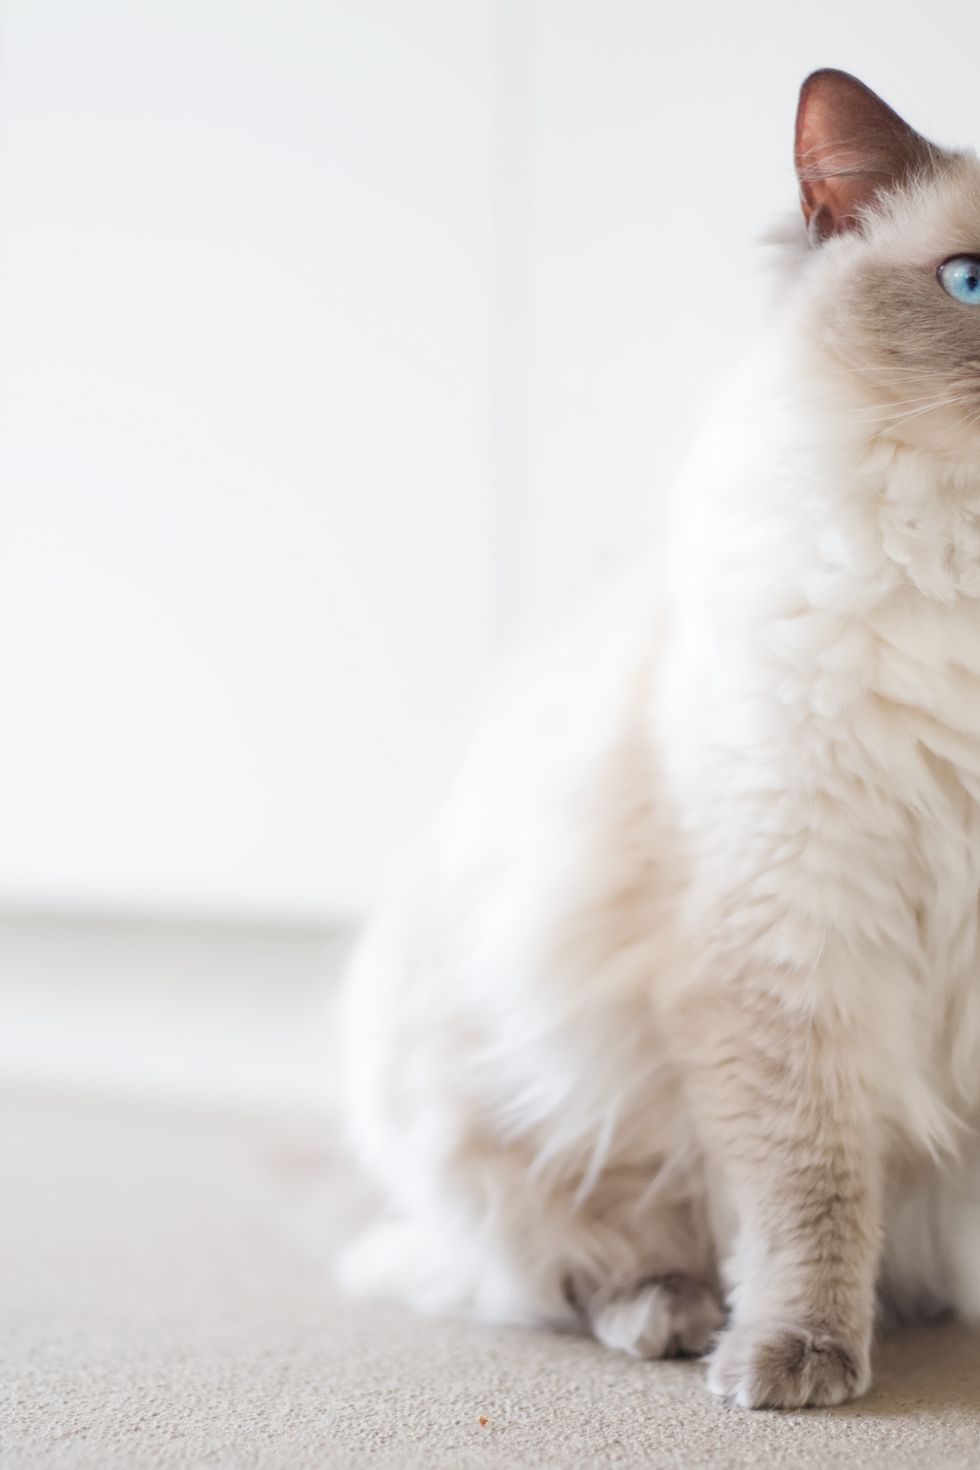 10 Best Cat Breeds for Homes with Dogs